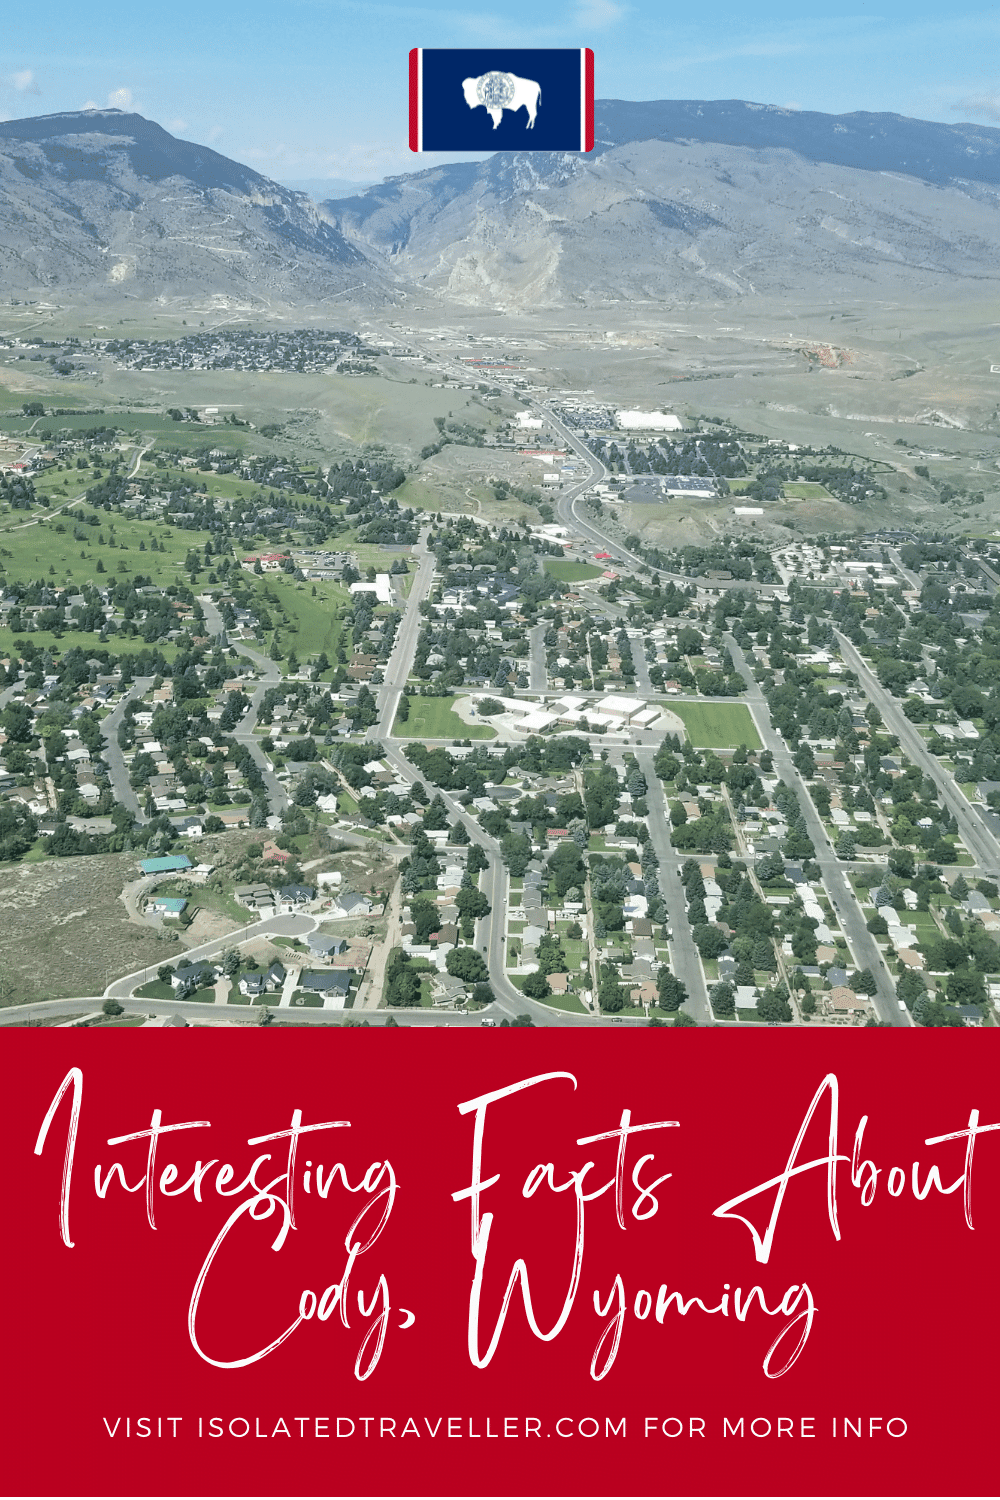 Facts About Cody, Wyoming